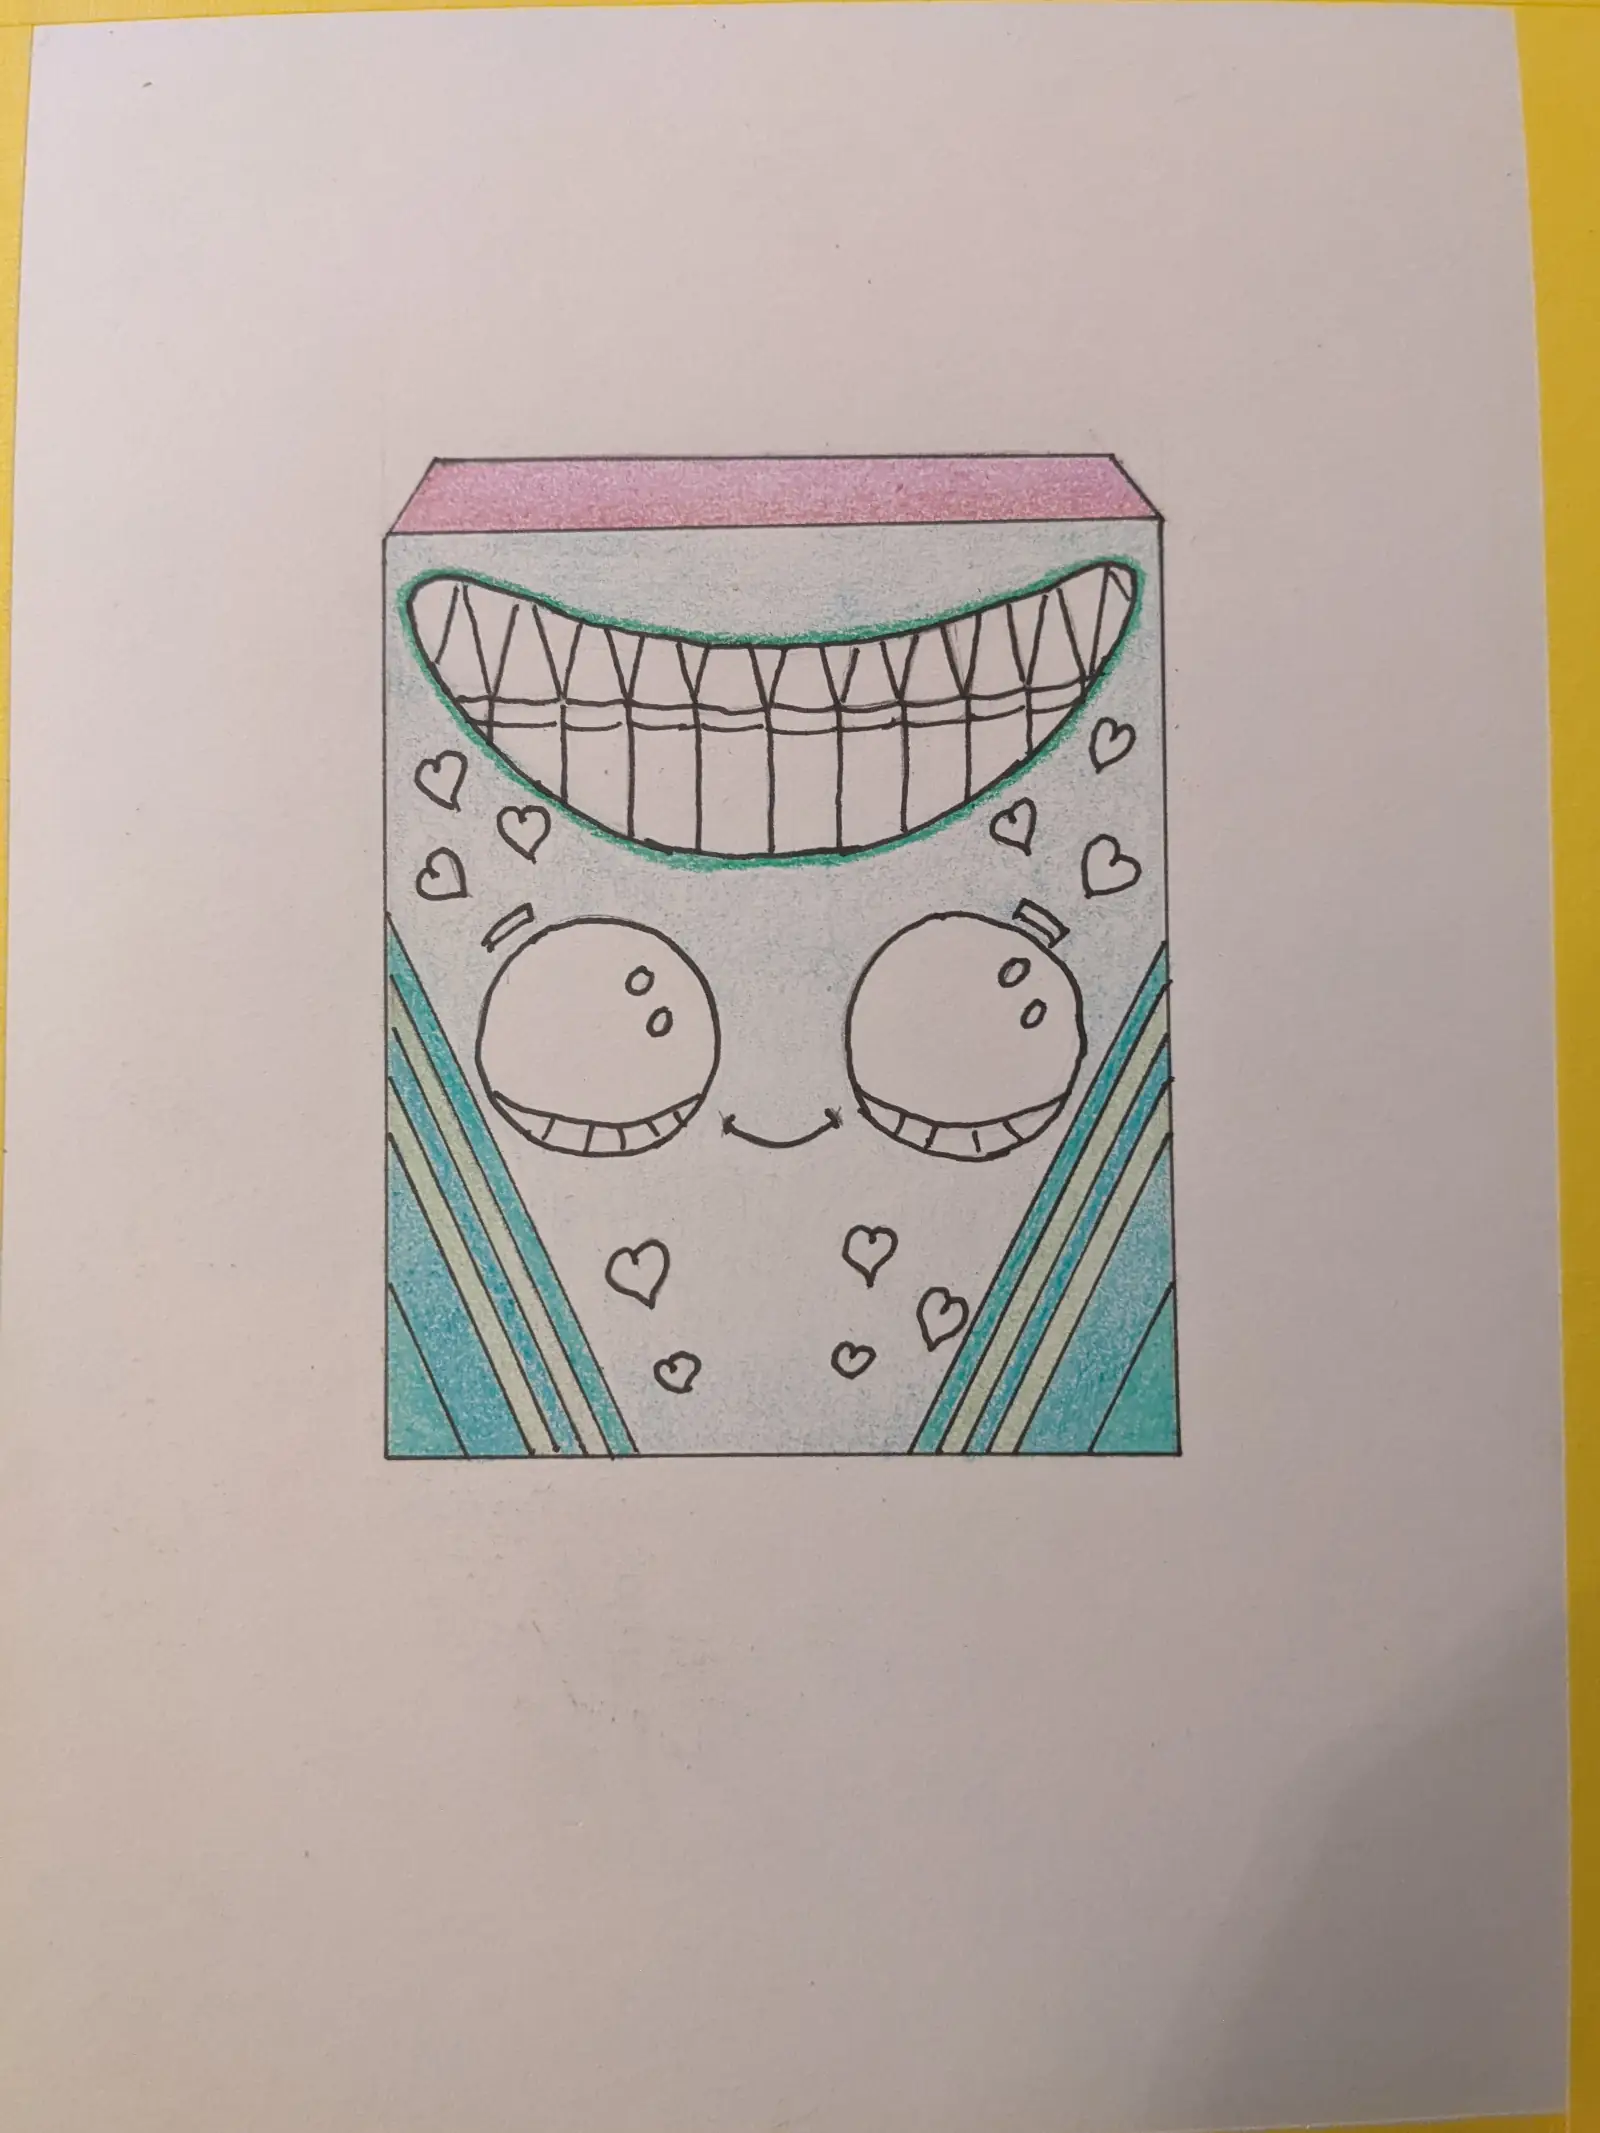 Hand-drawn color crayon box with a face and hearts on the design. Partially colored.